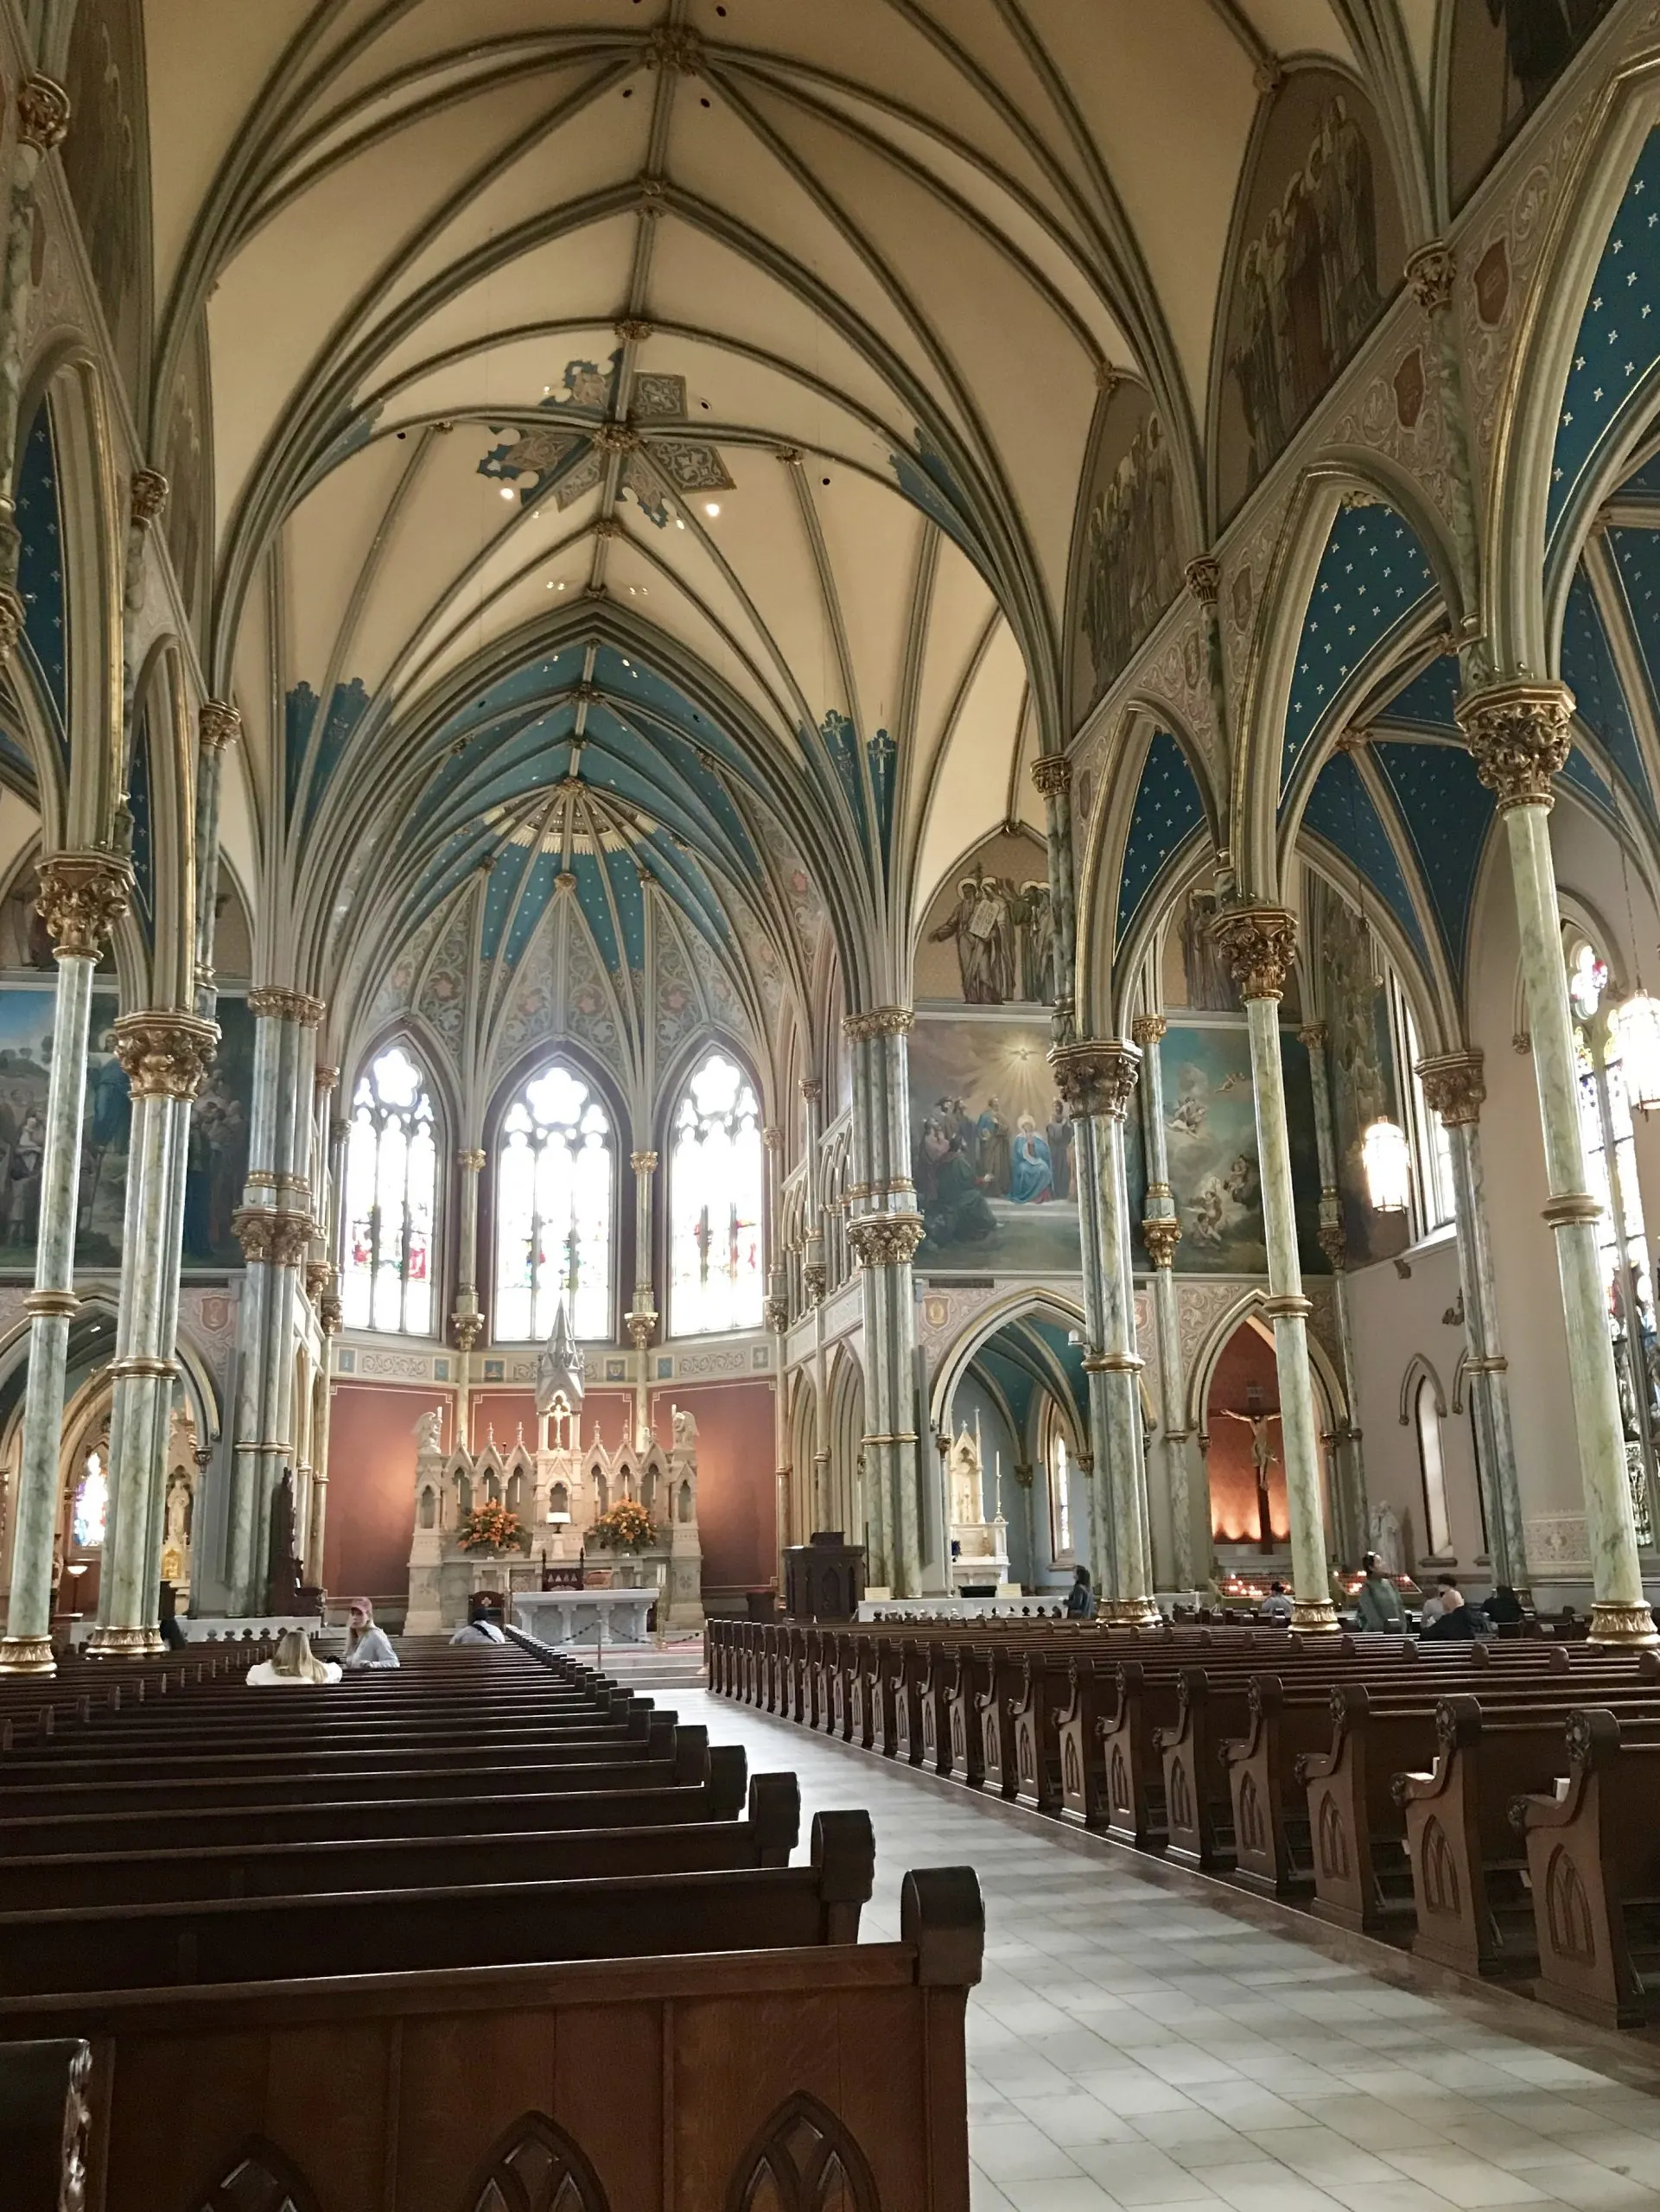 interior of cathedral of st john the Baptist church - things to do in Savannah GA with kids